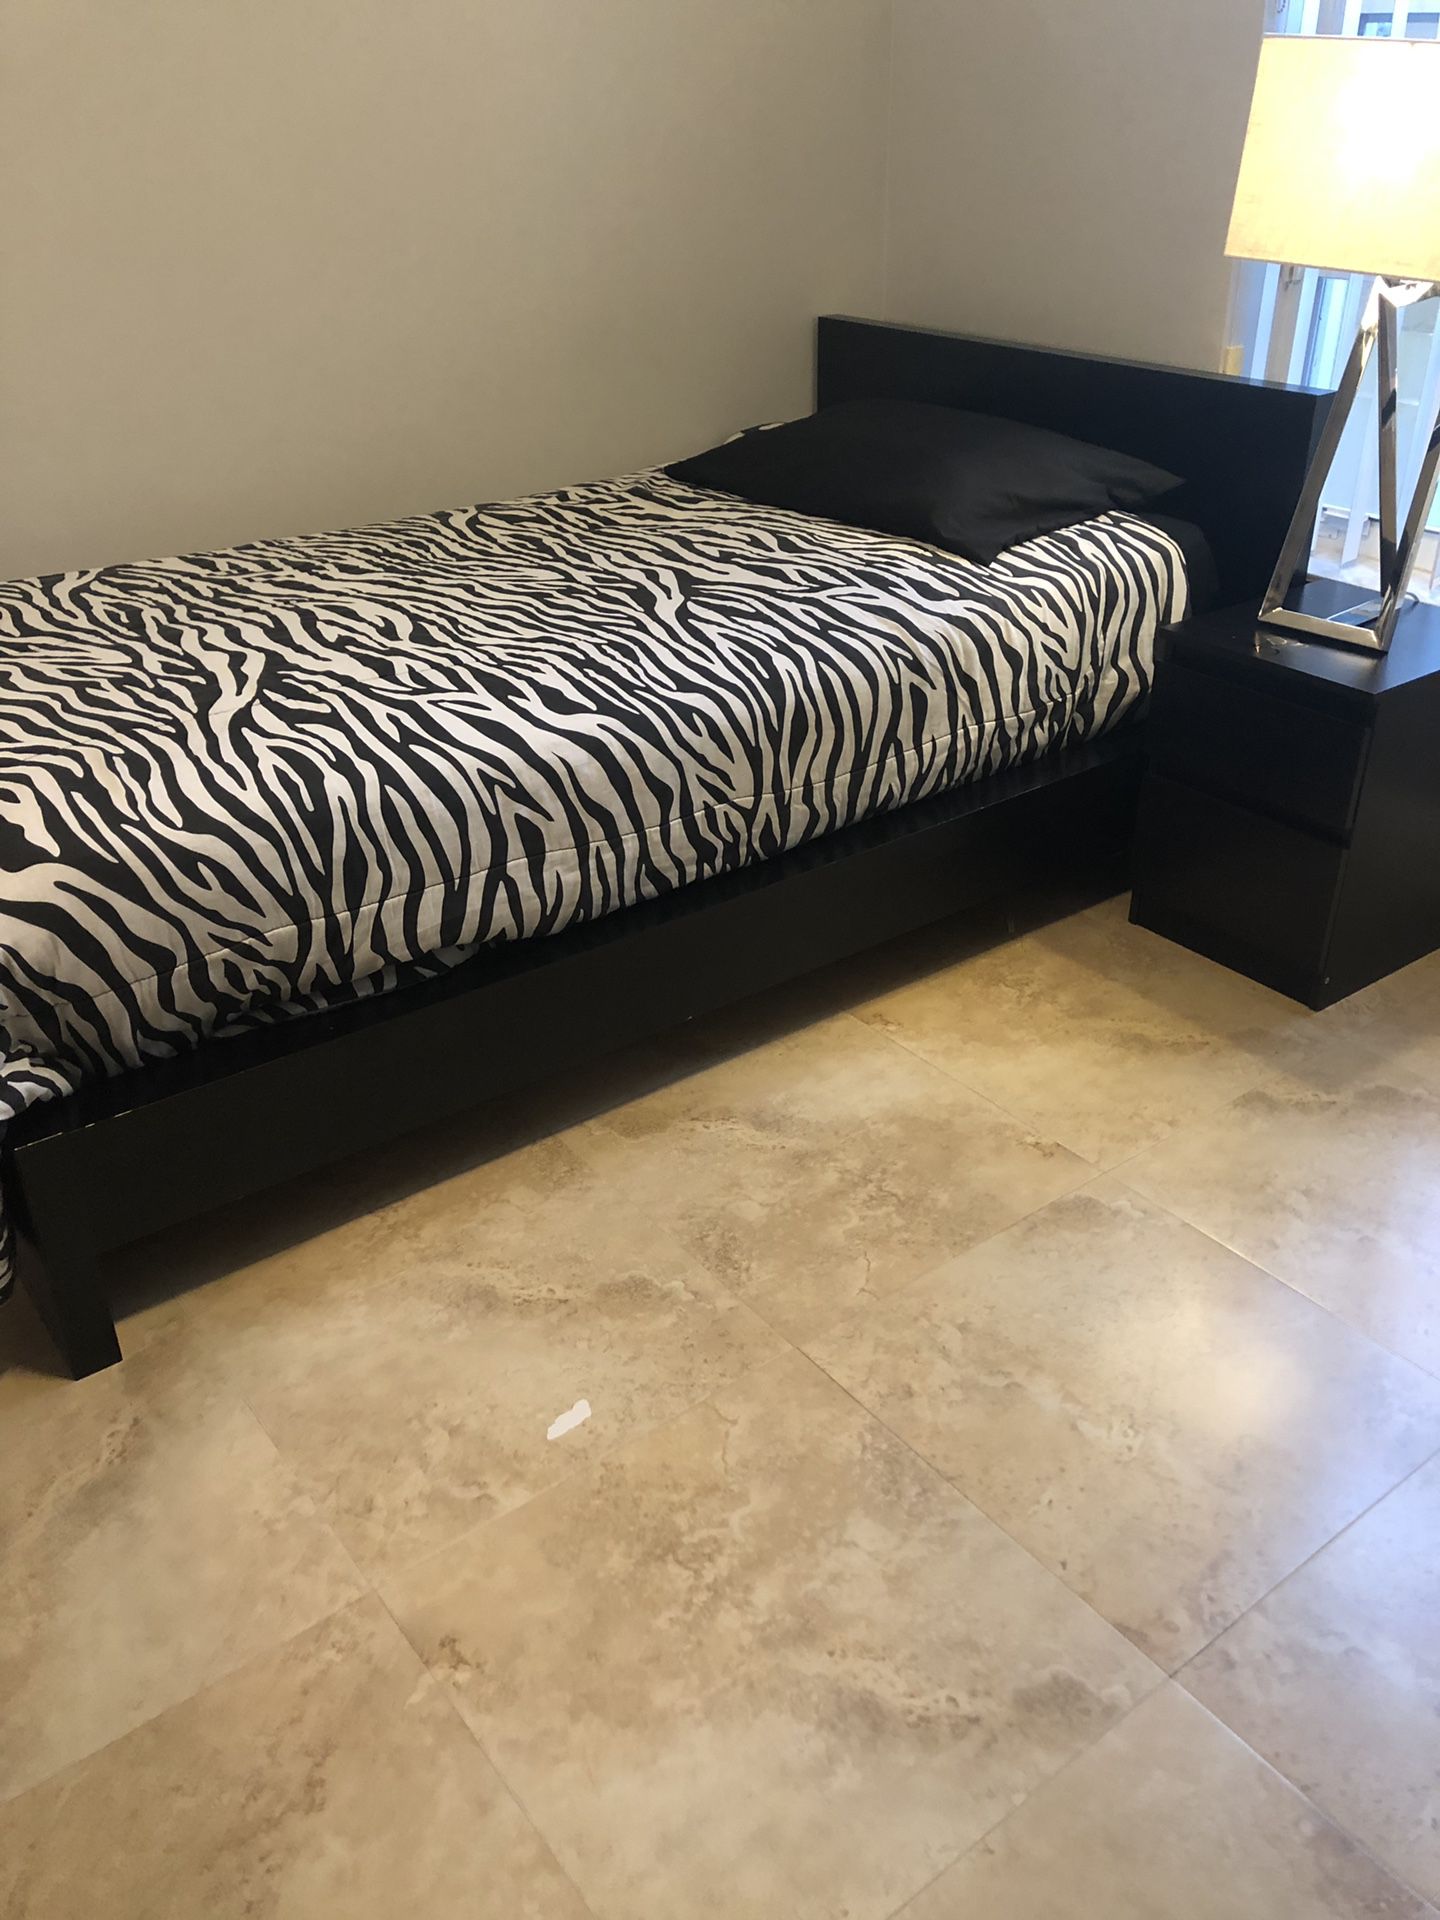 Complete twin size beds with mattress! Great condition